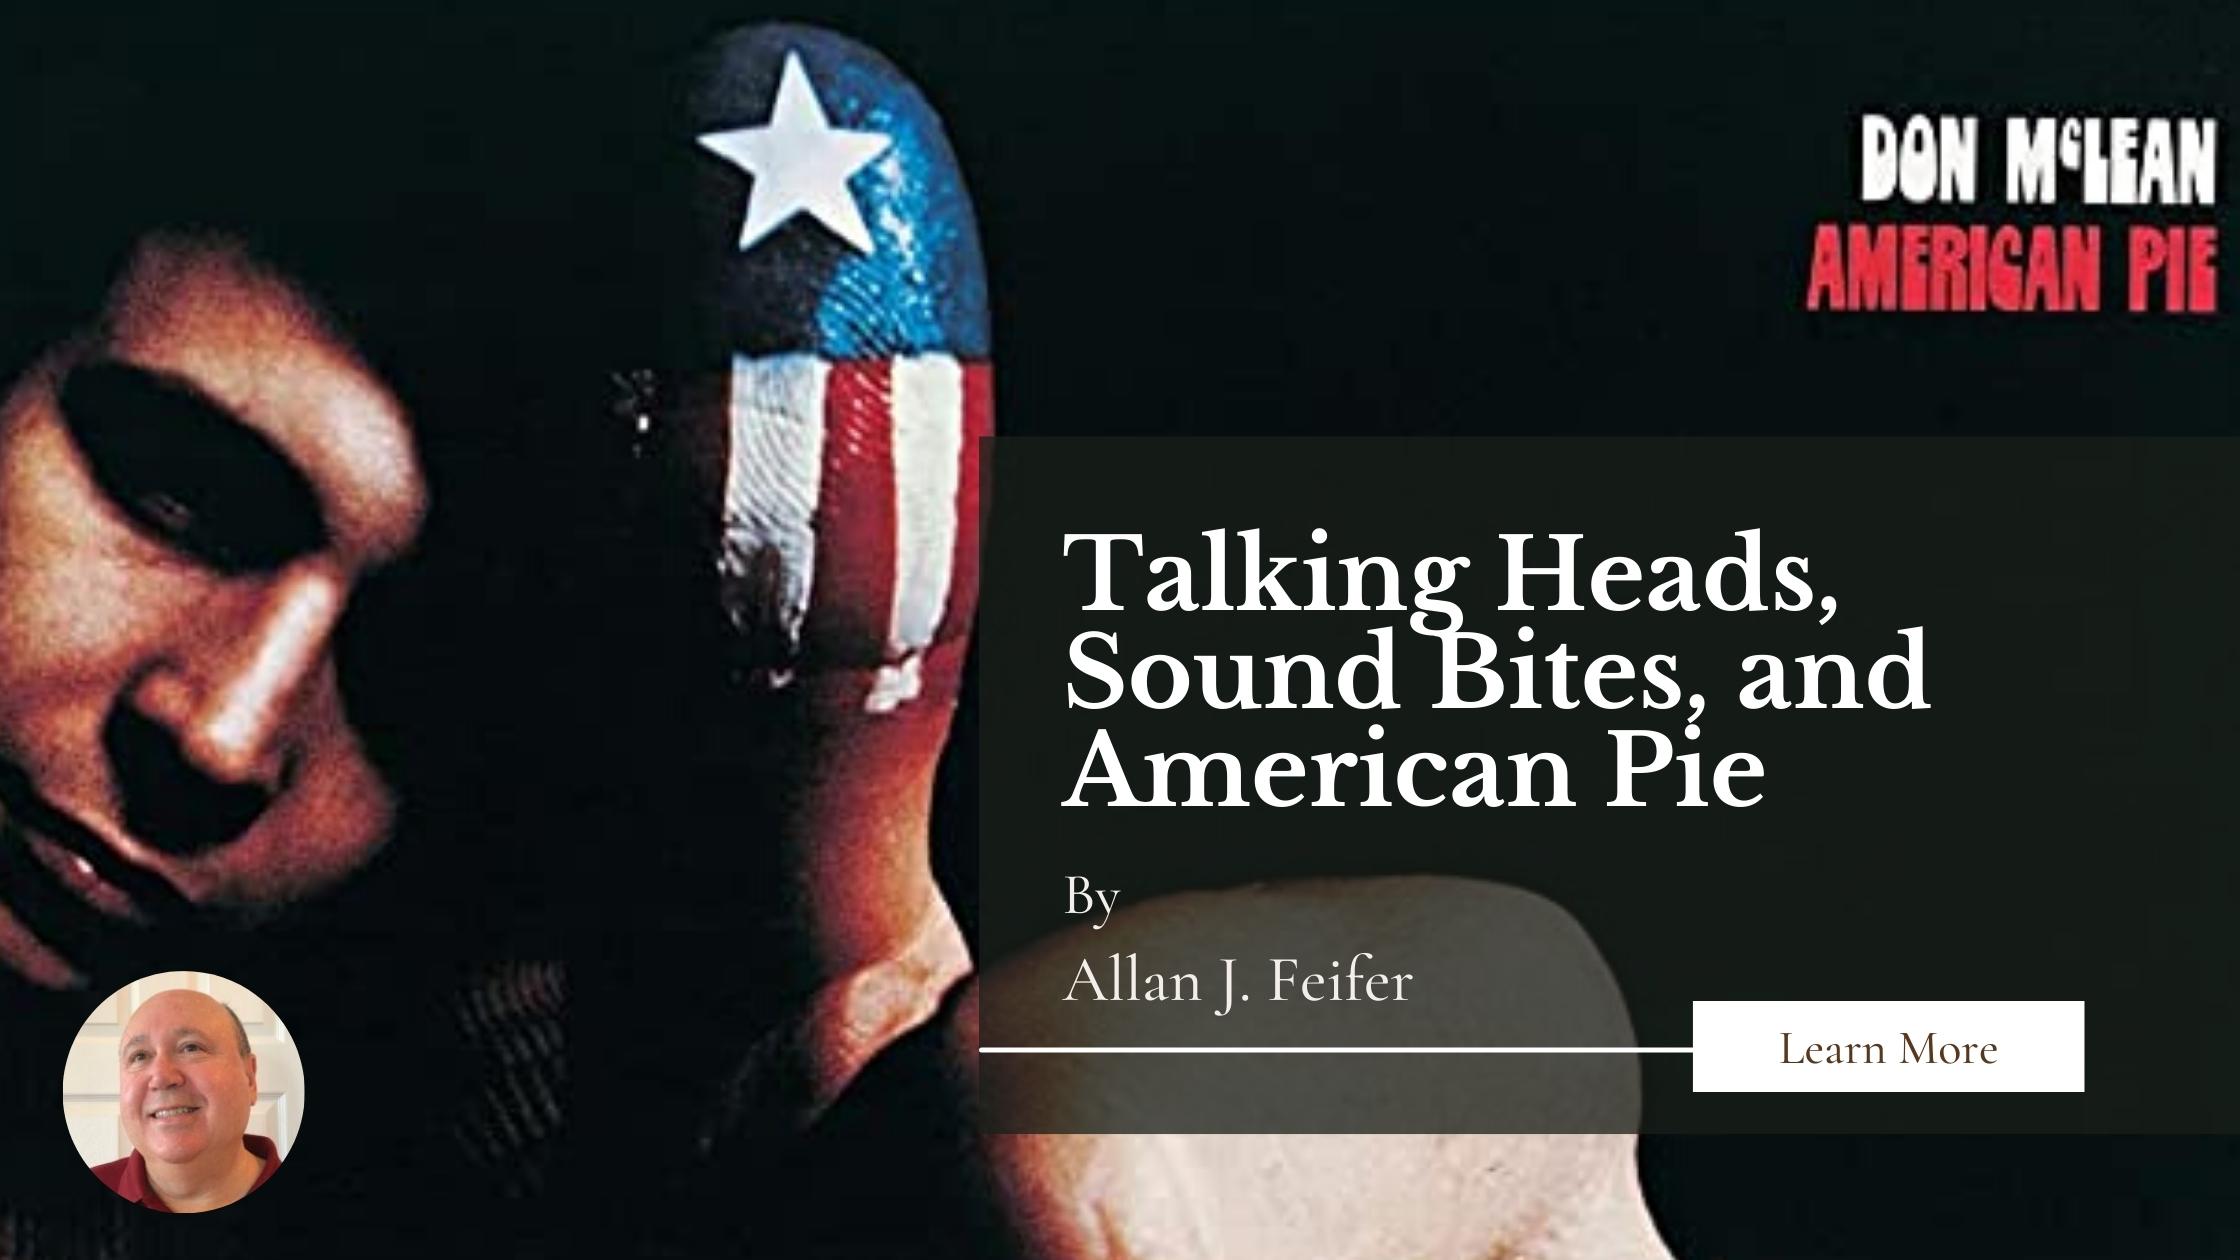 Talking Heads, Sound Bites, and American Pie